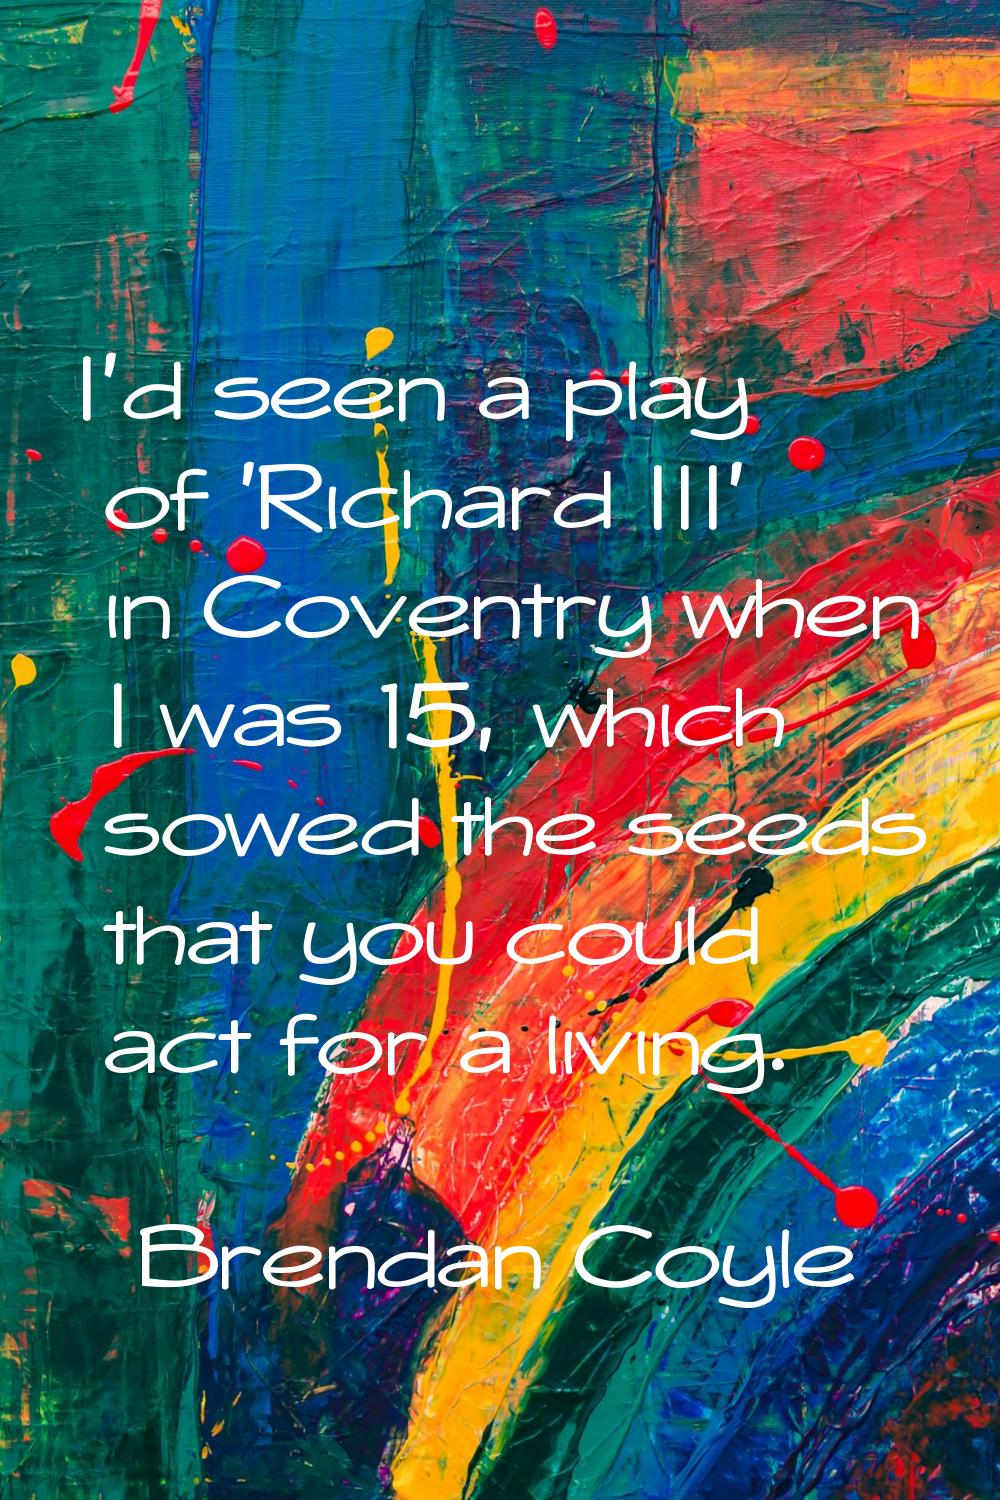 I'd seen a play of 'Richard III' in Coventry when I was 15, which sowed the seeds that you could ac